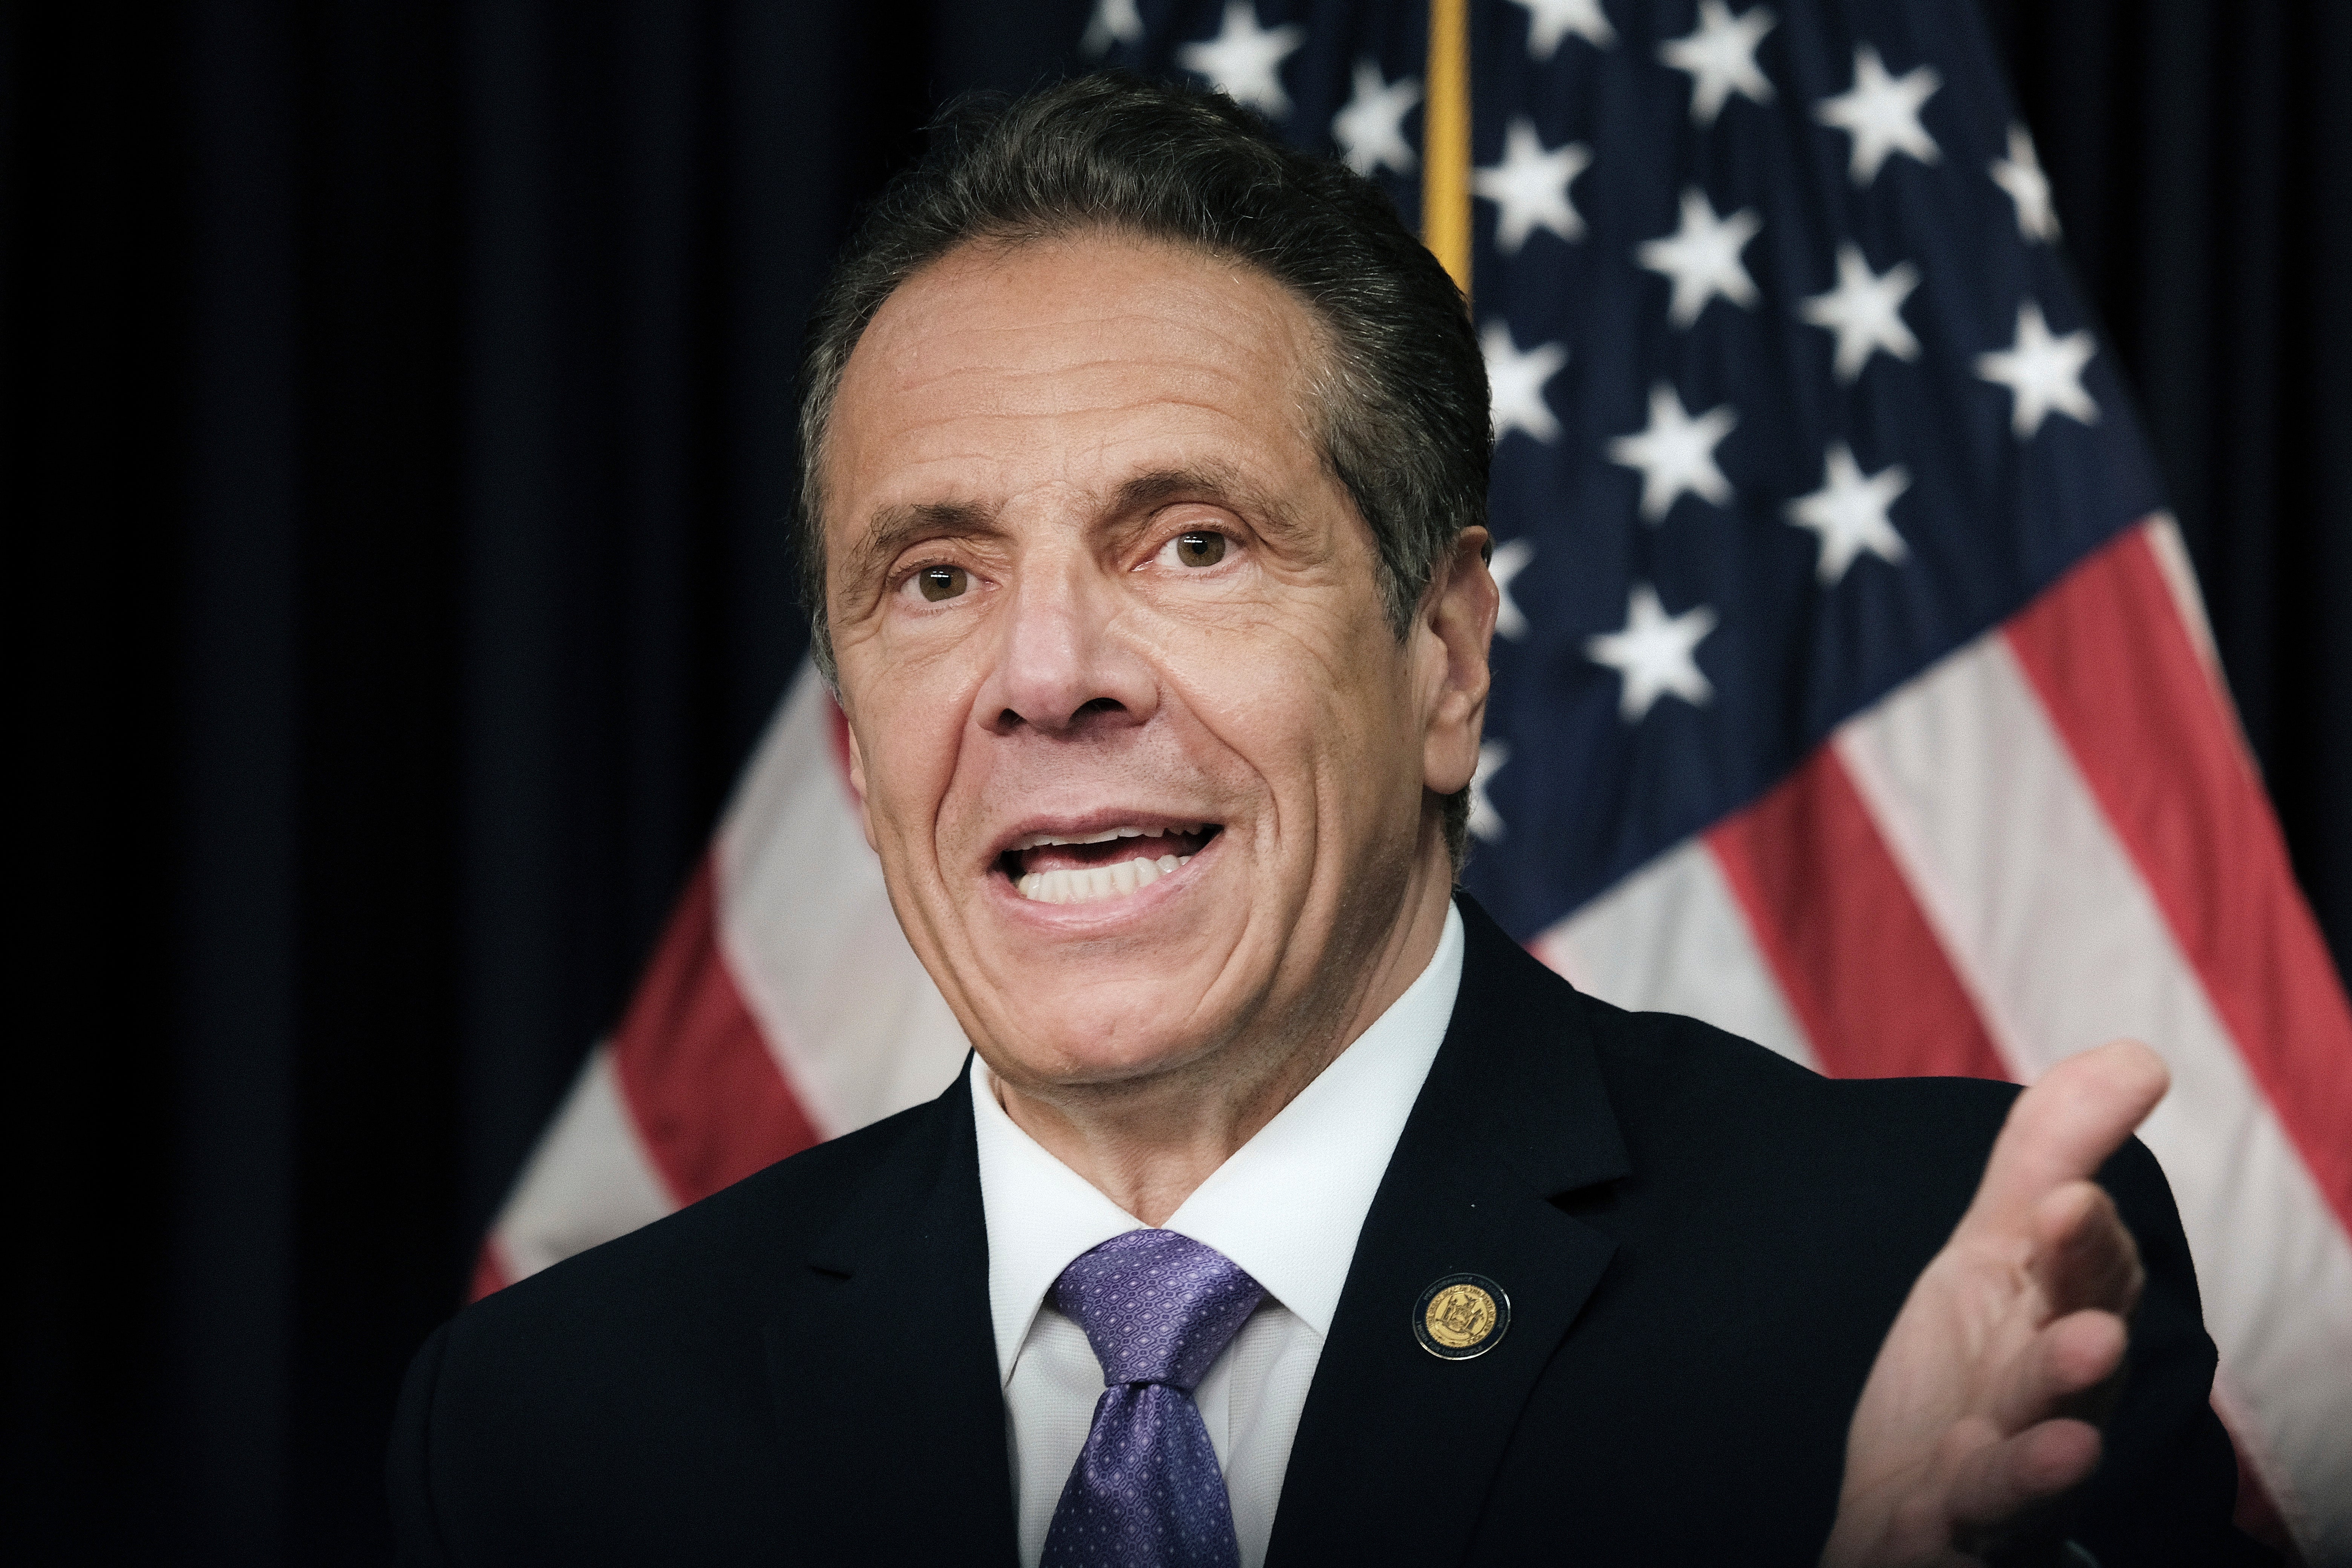 Another member of Andrew Cuomo’s staff has resigned